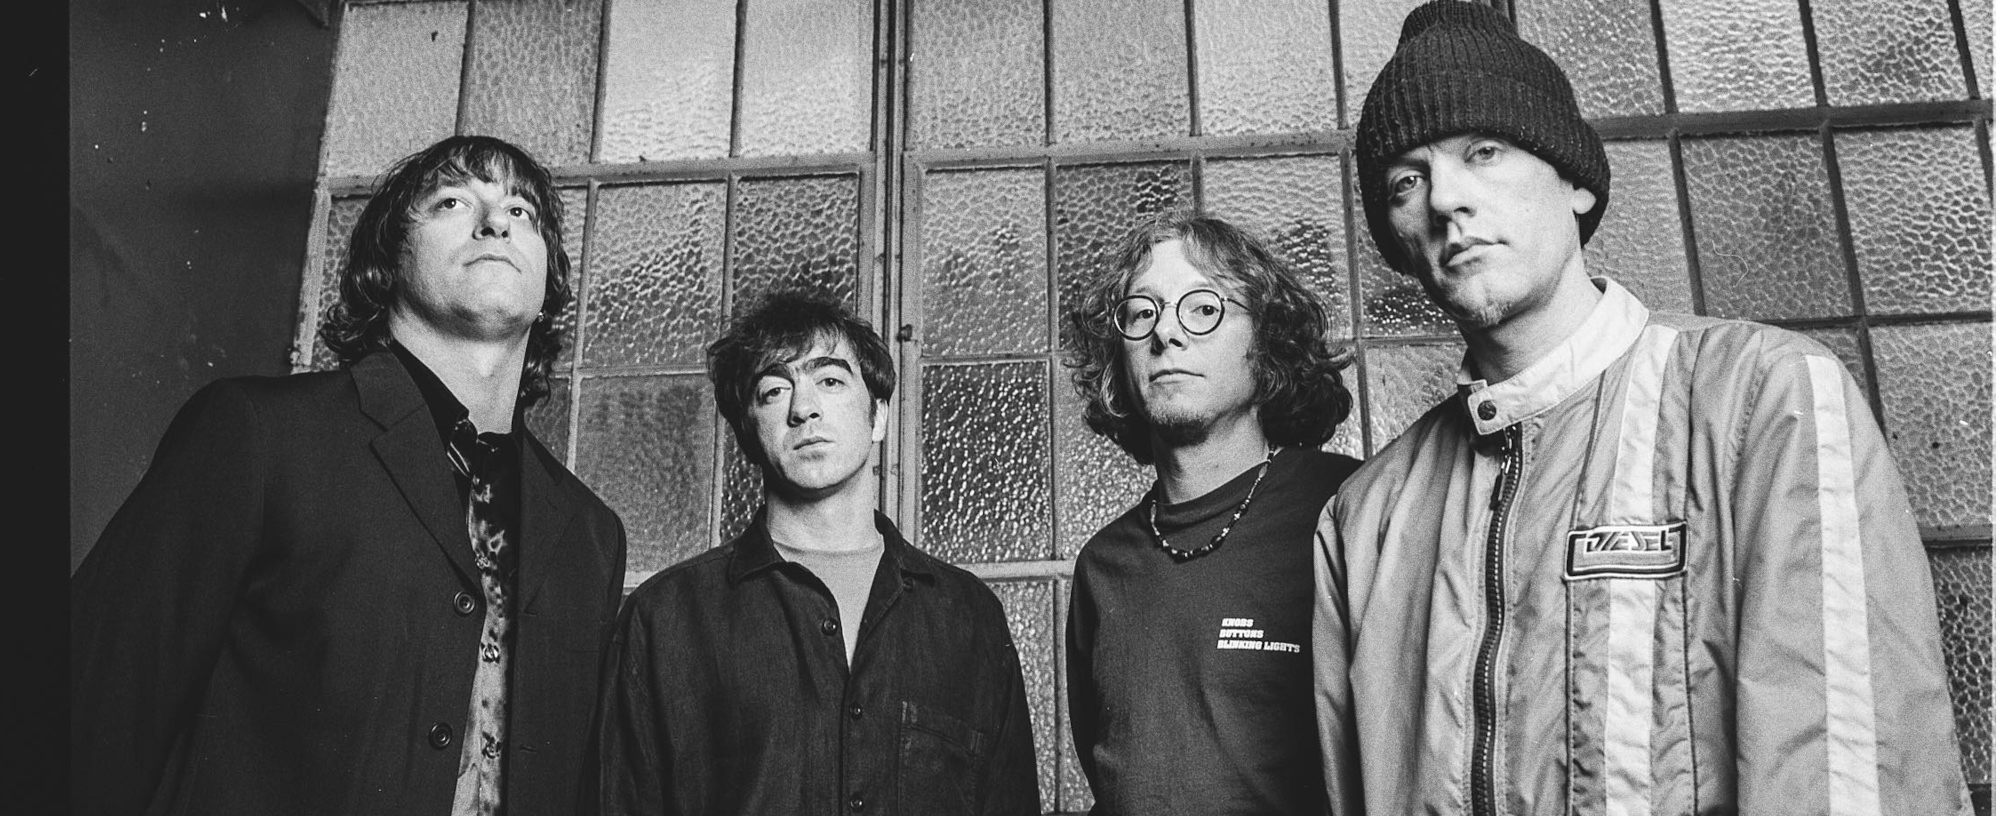 R.E.M. to Release 25th Anniversary Reissue of ‘New Adventures In Hi-Fi’